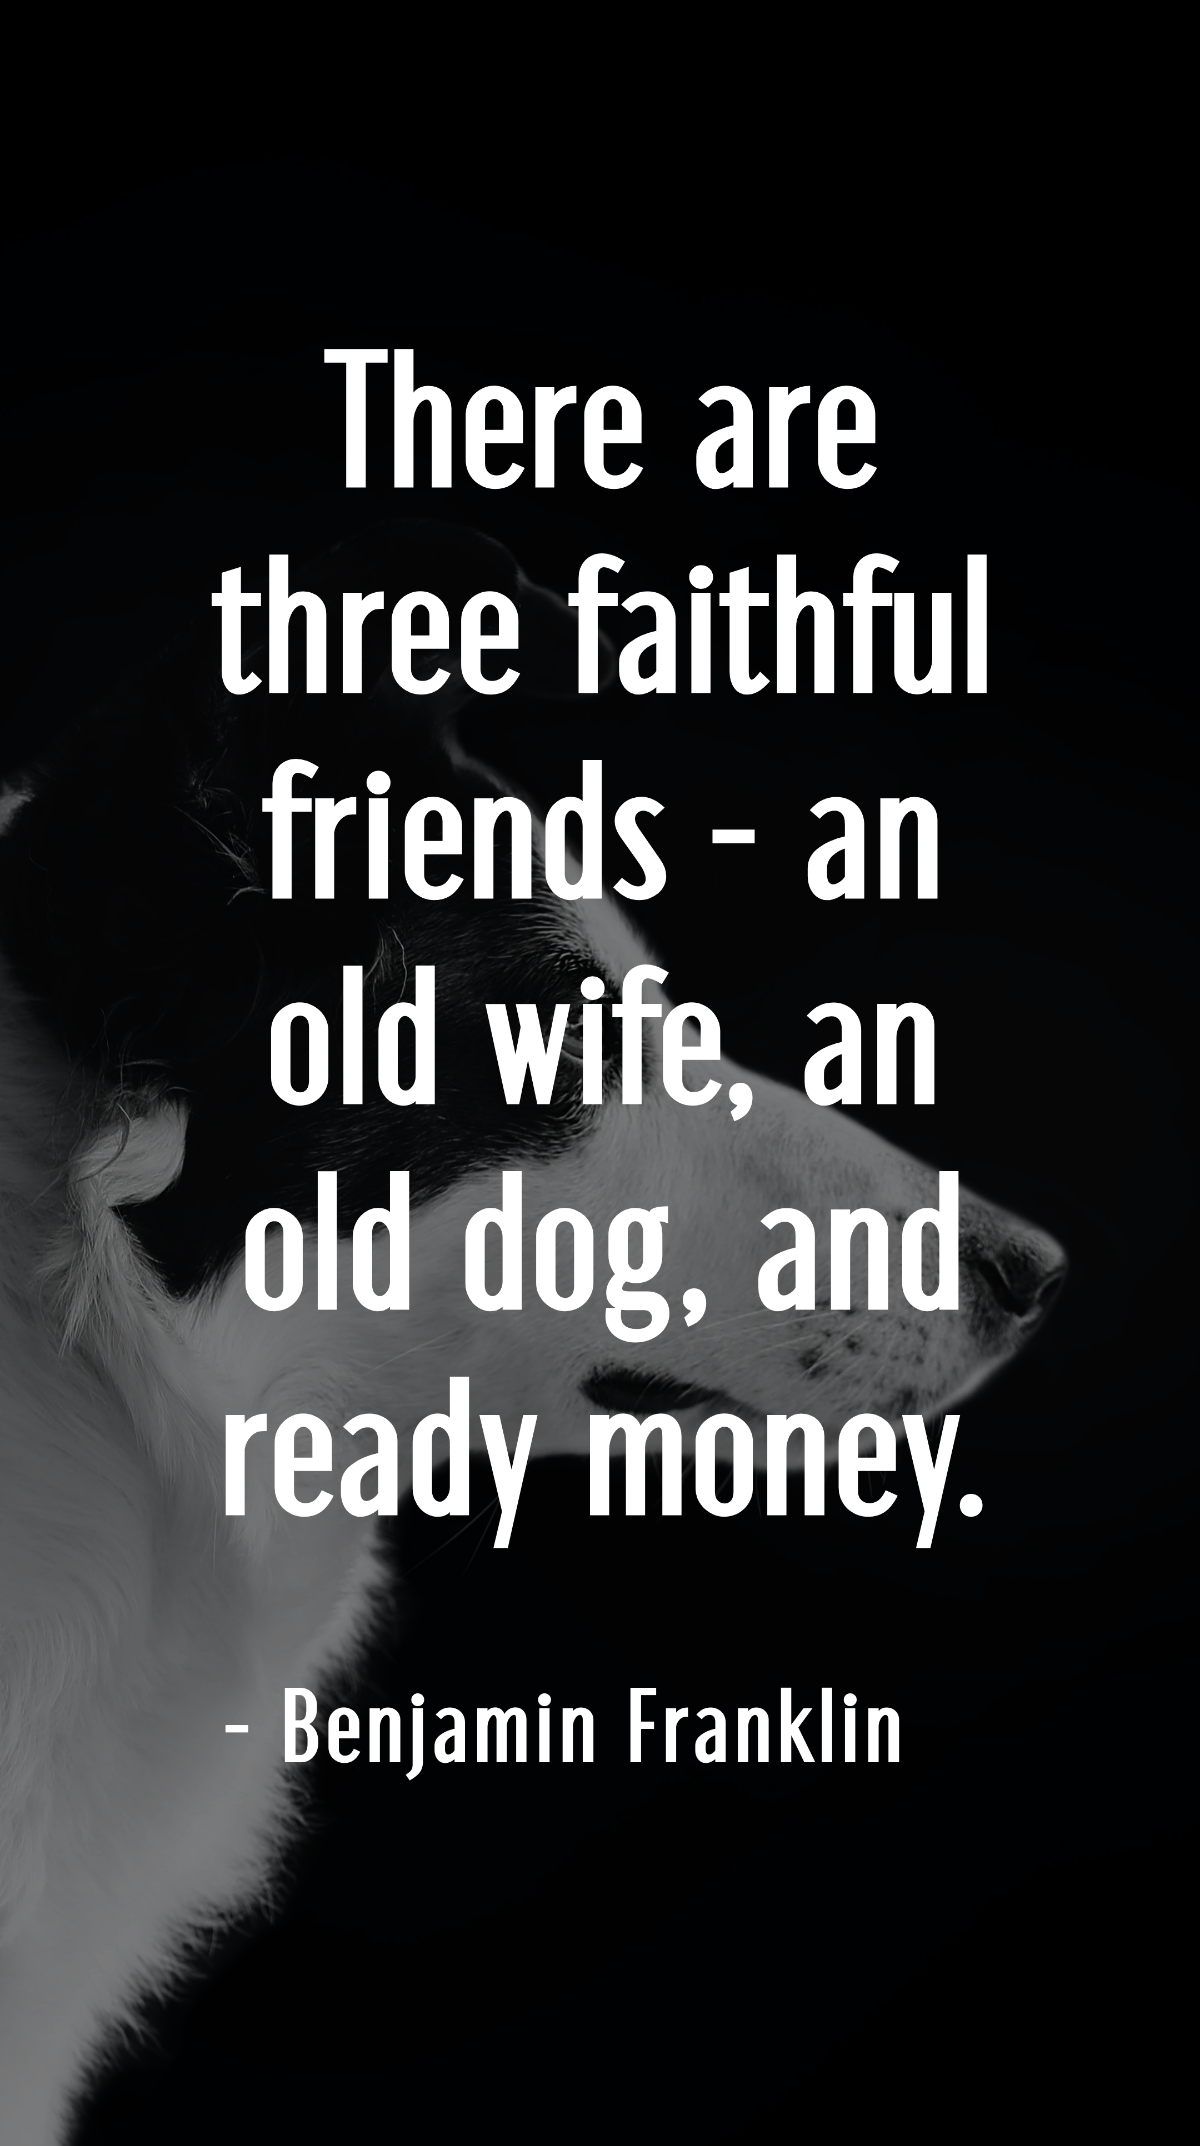 Benjamin Franklin - There are three faithful friends - an old wife, an old dog, and ready money.